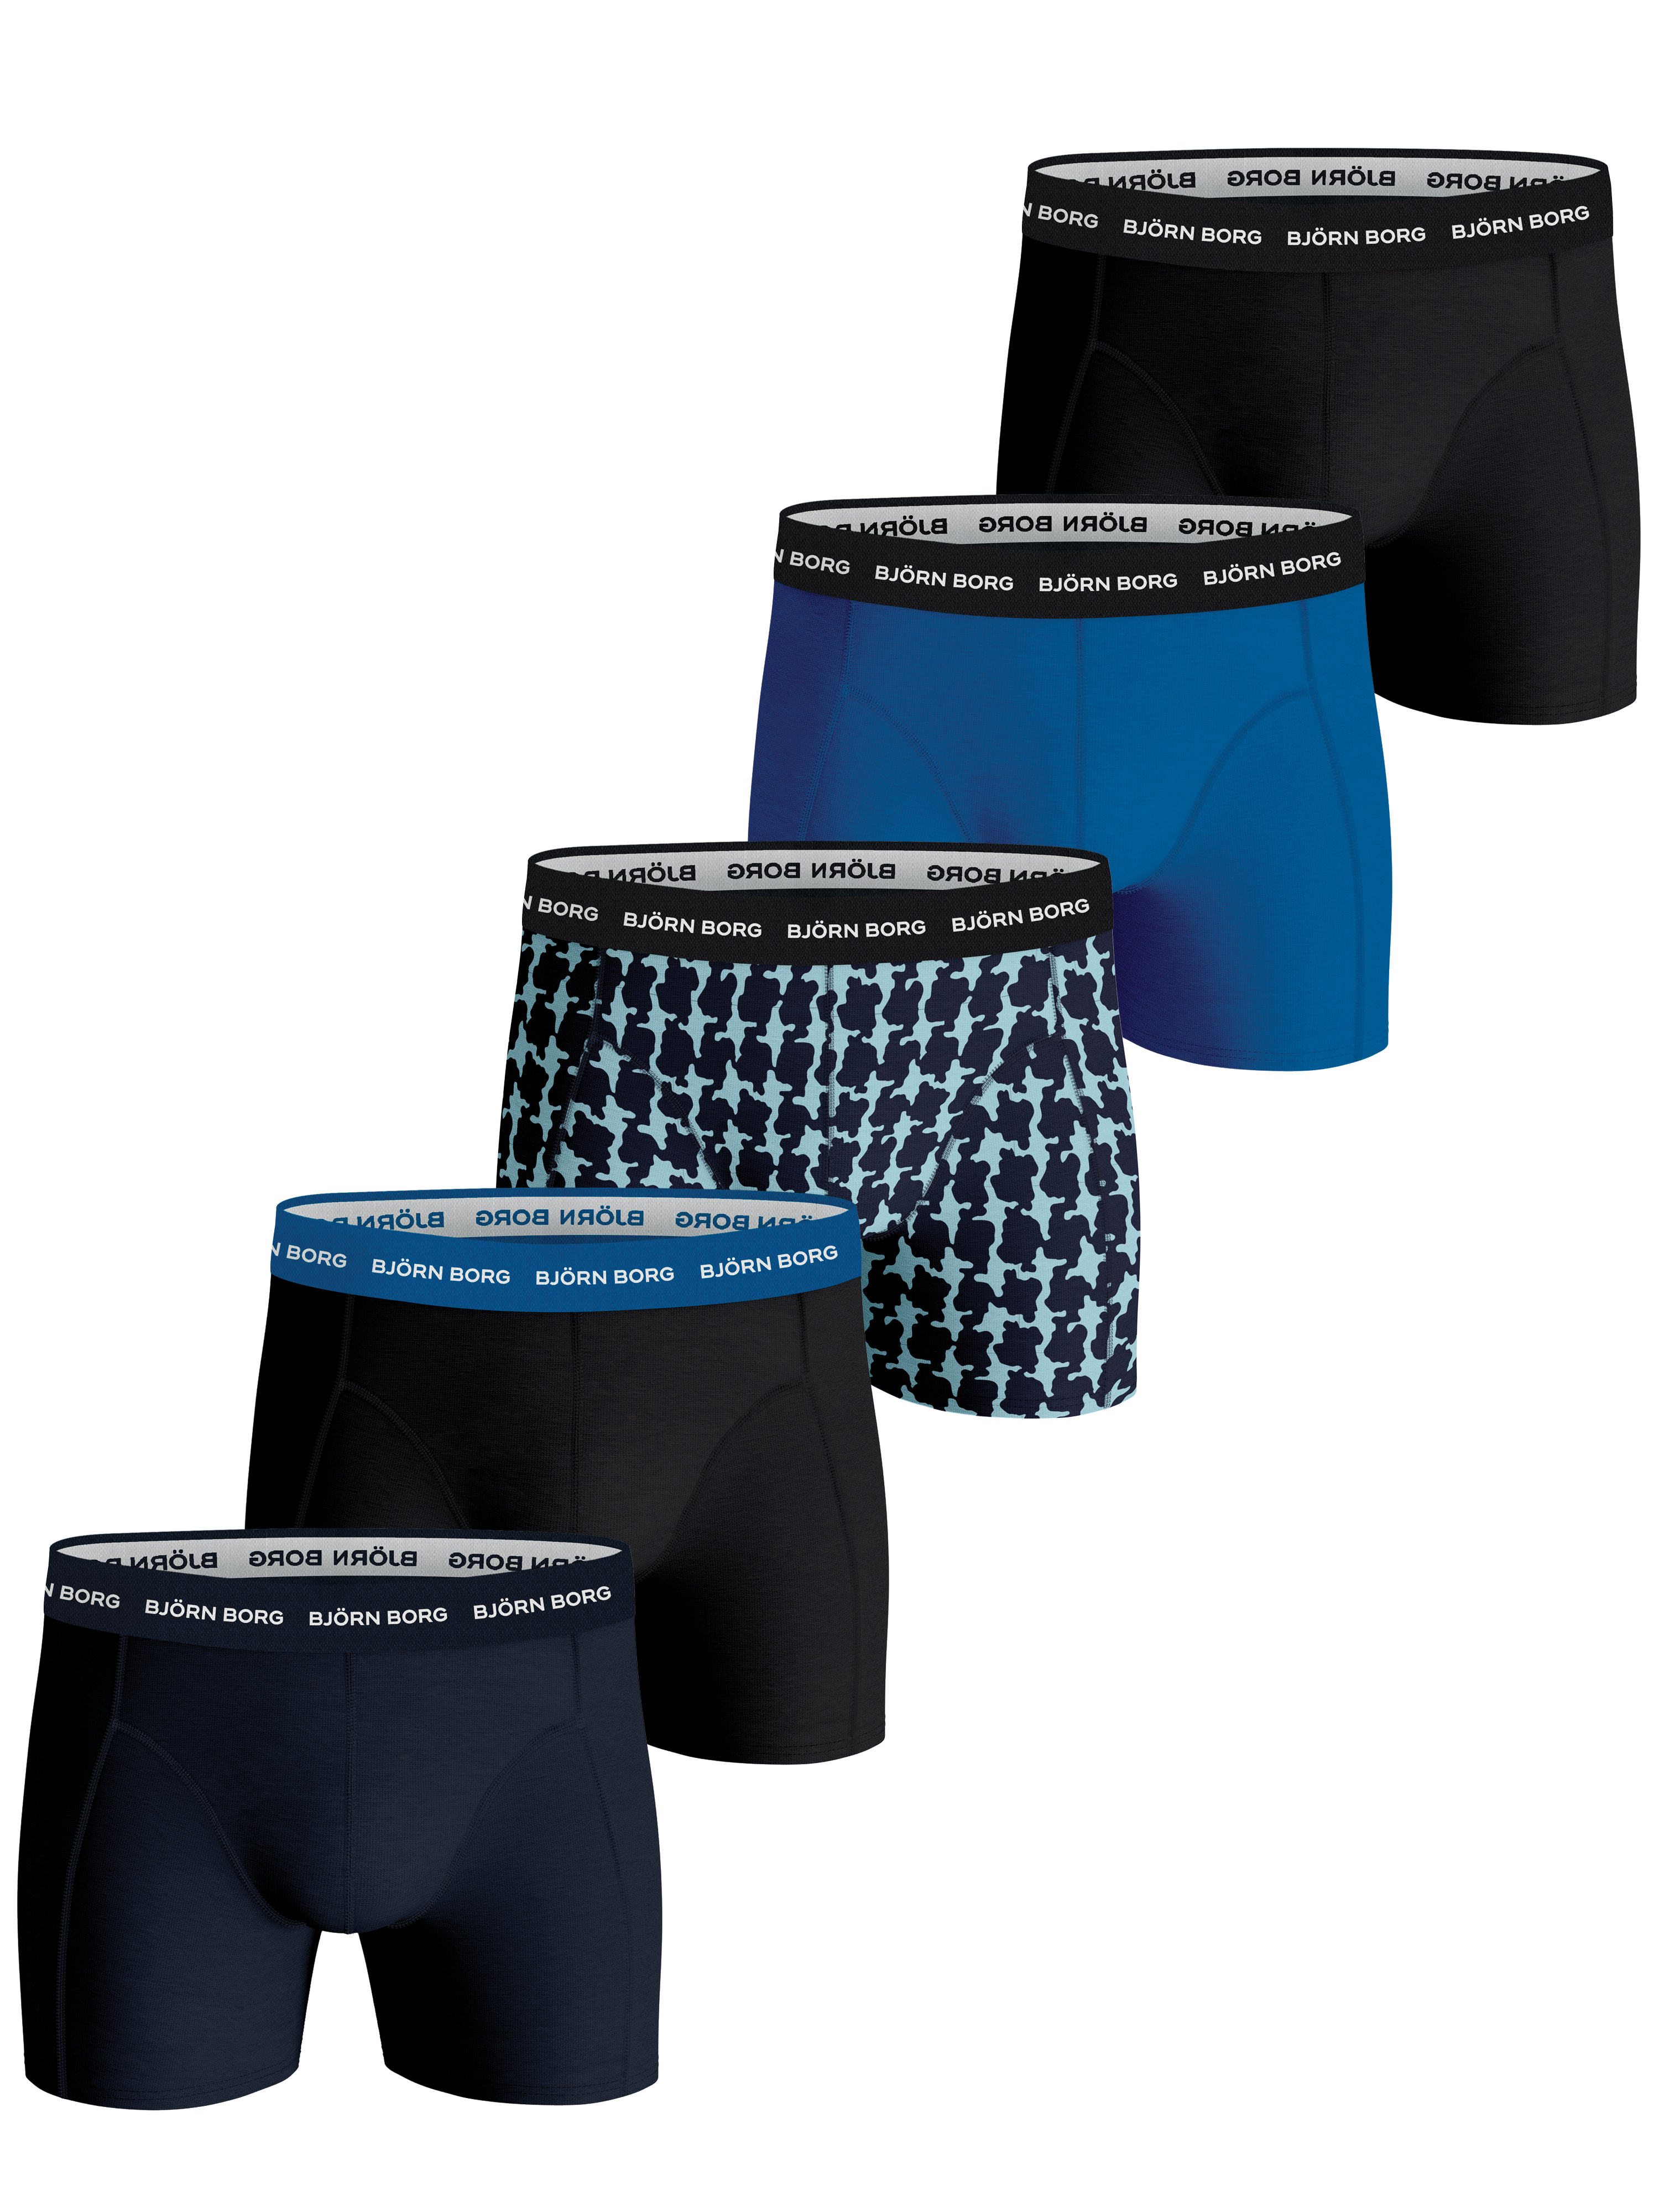 Bjorn Borg Mens BB Midsummer 3 Pack Mositure Wicking Boxers 32% OFF RRP 